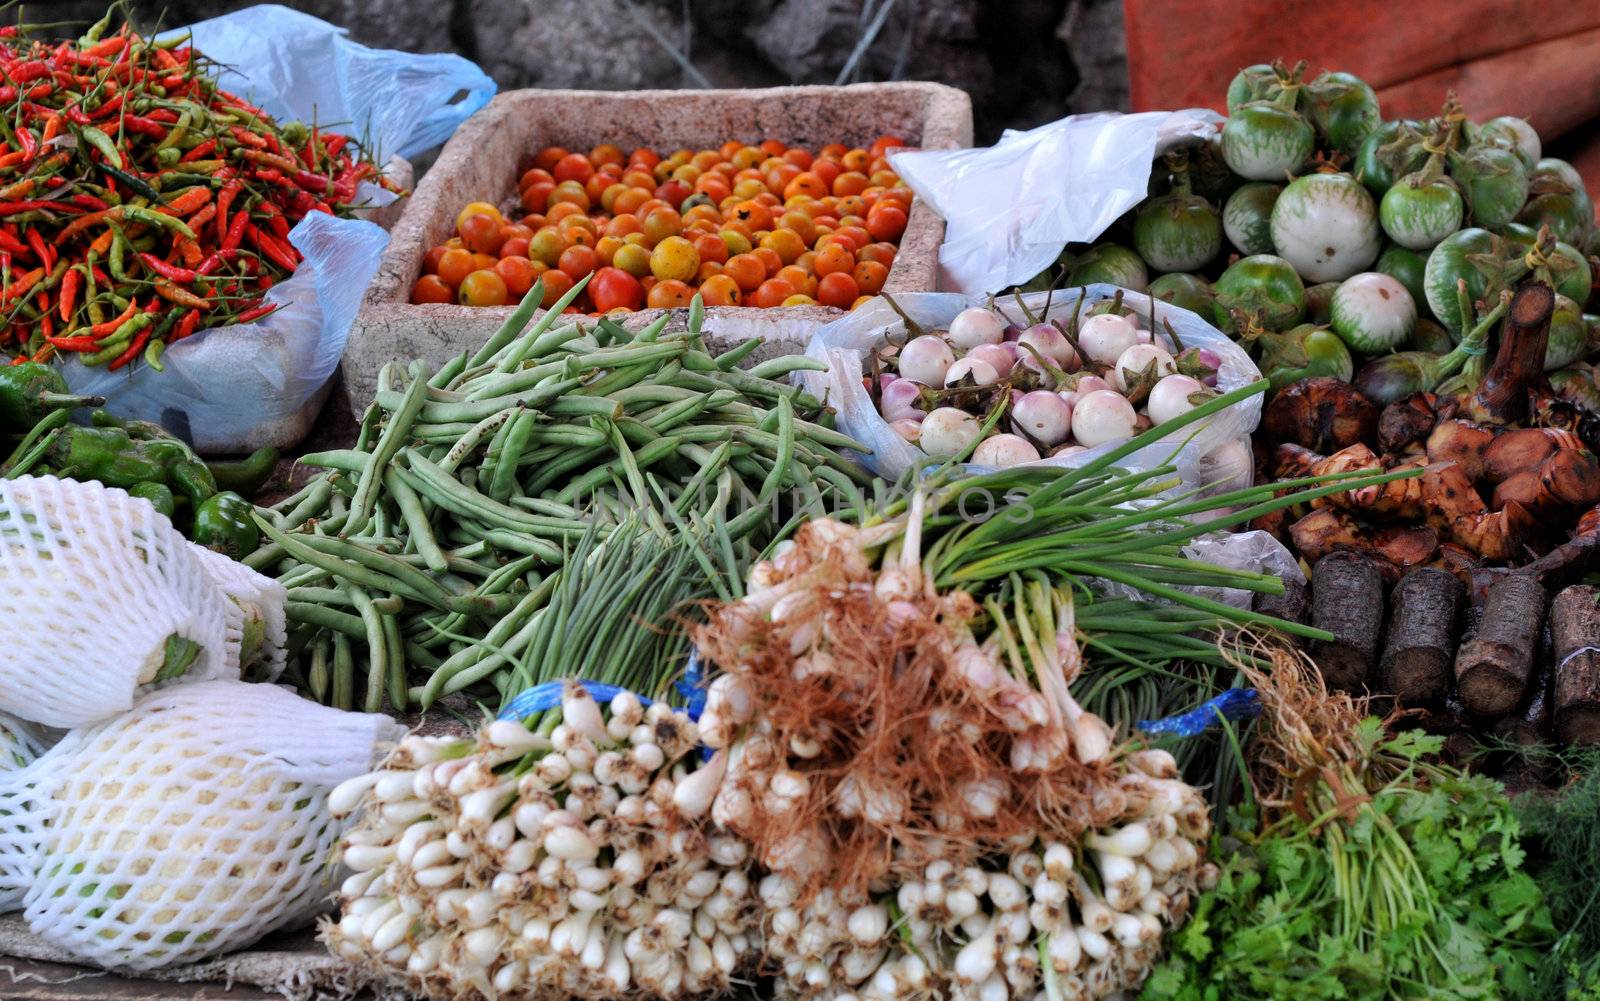 the morning market in luang prabang/laos:fresh fruits and exotic vegetables are sold here daily.